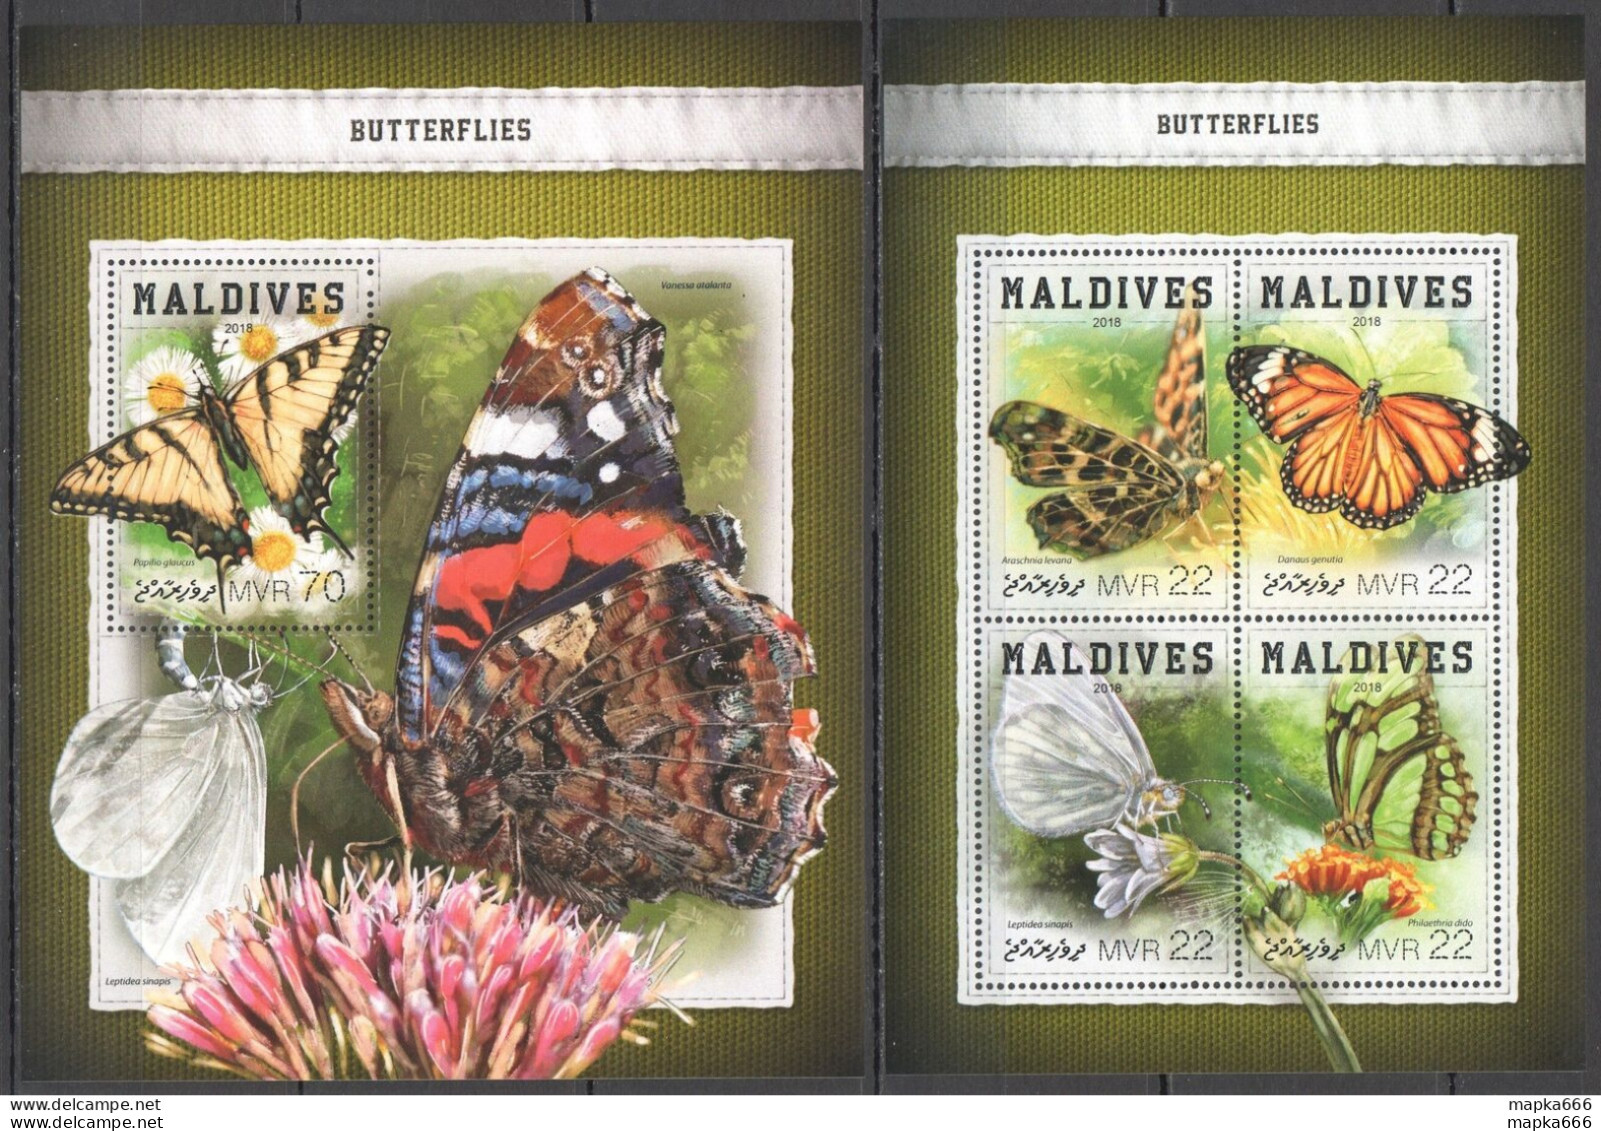 Hm0550 2018 Maldives Butterflies Fauna Insects Flowers #7488-1+Bl1163 Mnh - Vlinders